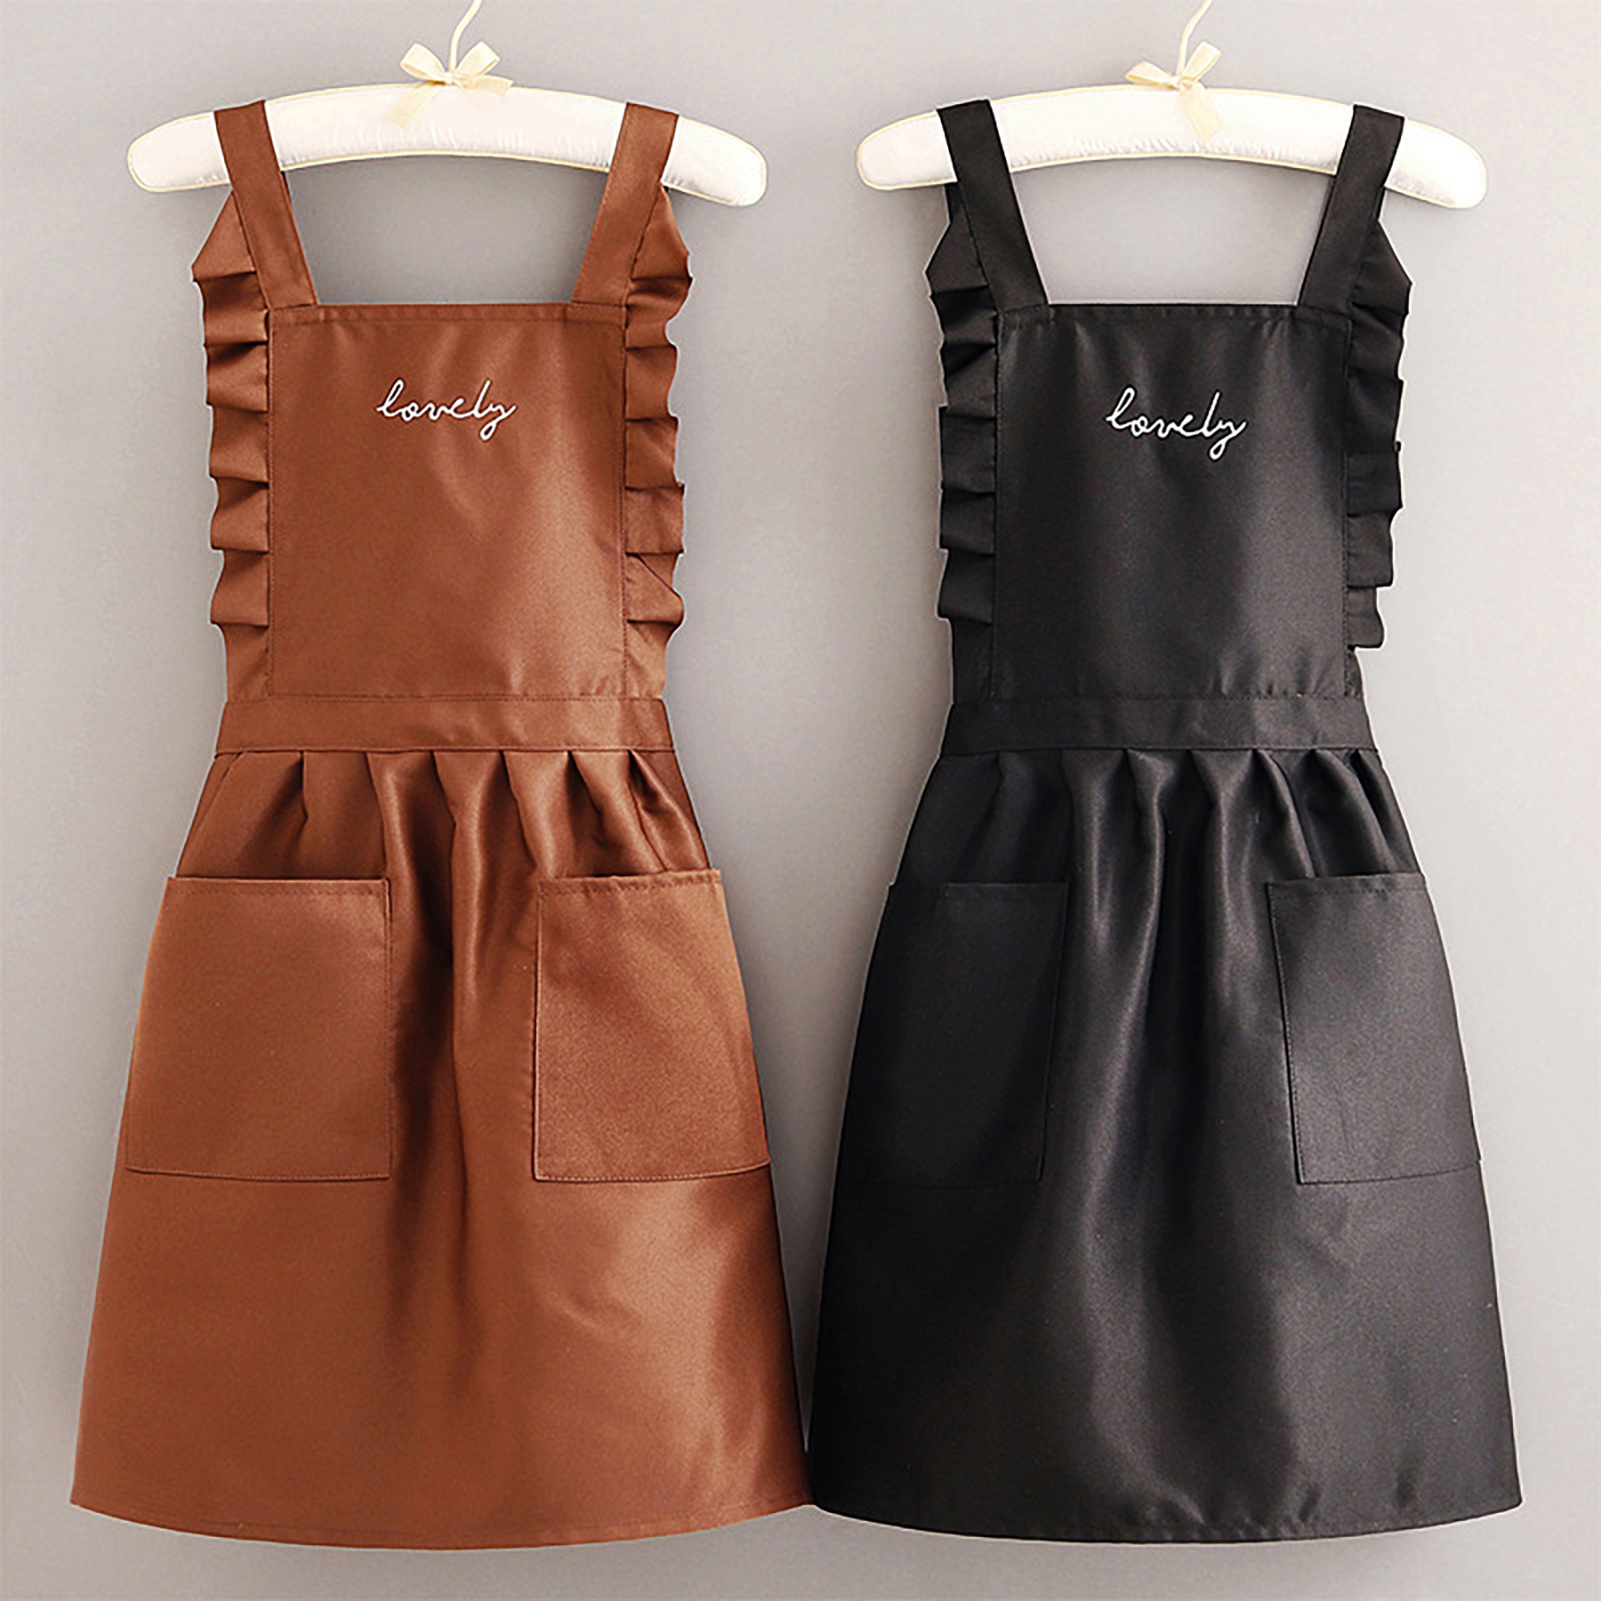 

Women's Adjustable Cotton Apron With Pockets, Breathable Kitchen Wear, Princess Skirt Style, Cafe & Garden Work, Daily Use, Size 35.43"x27.56" - Lovely Design